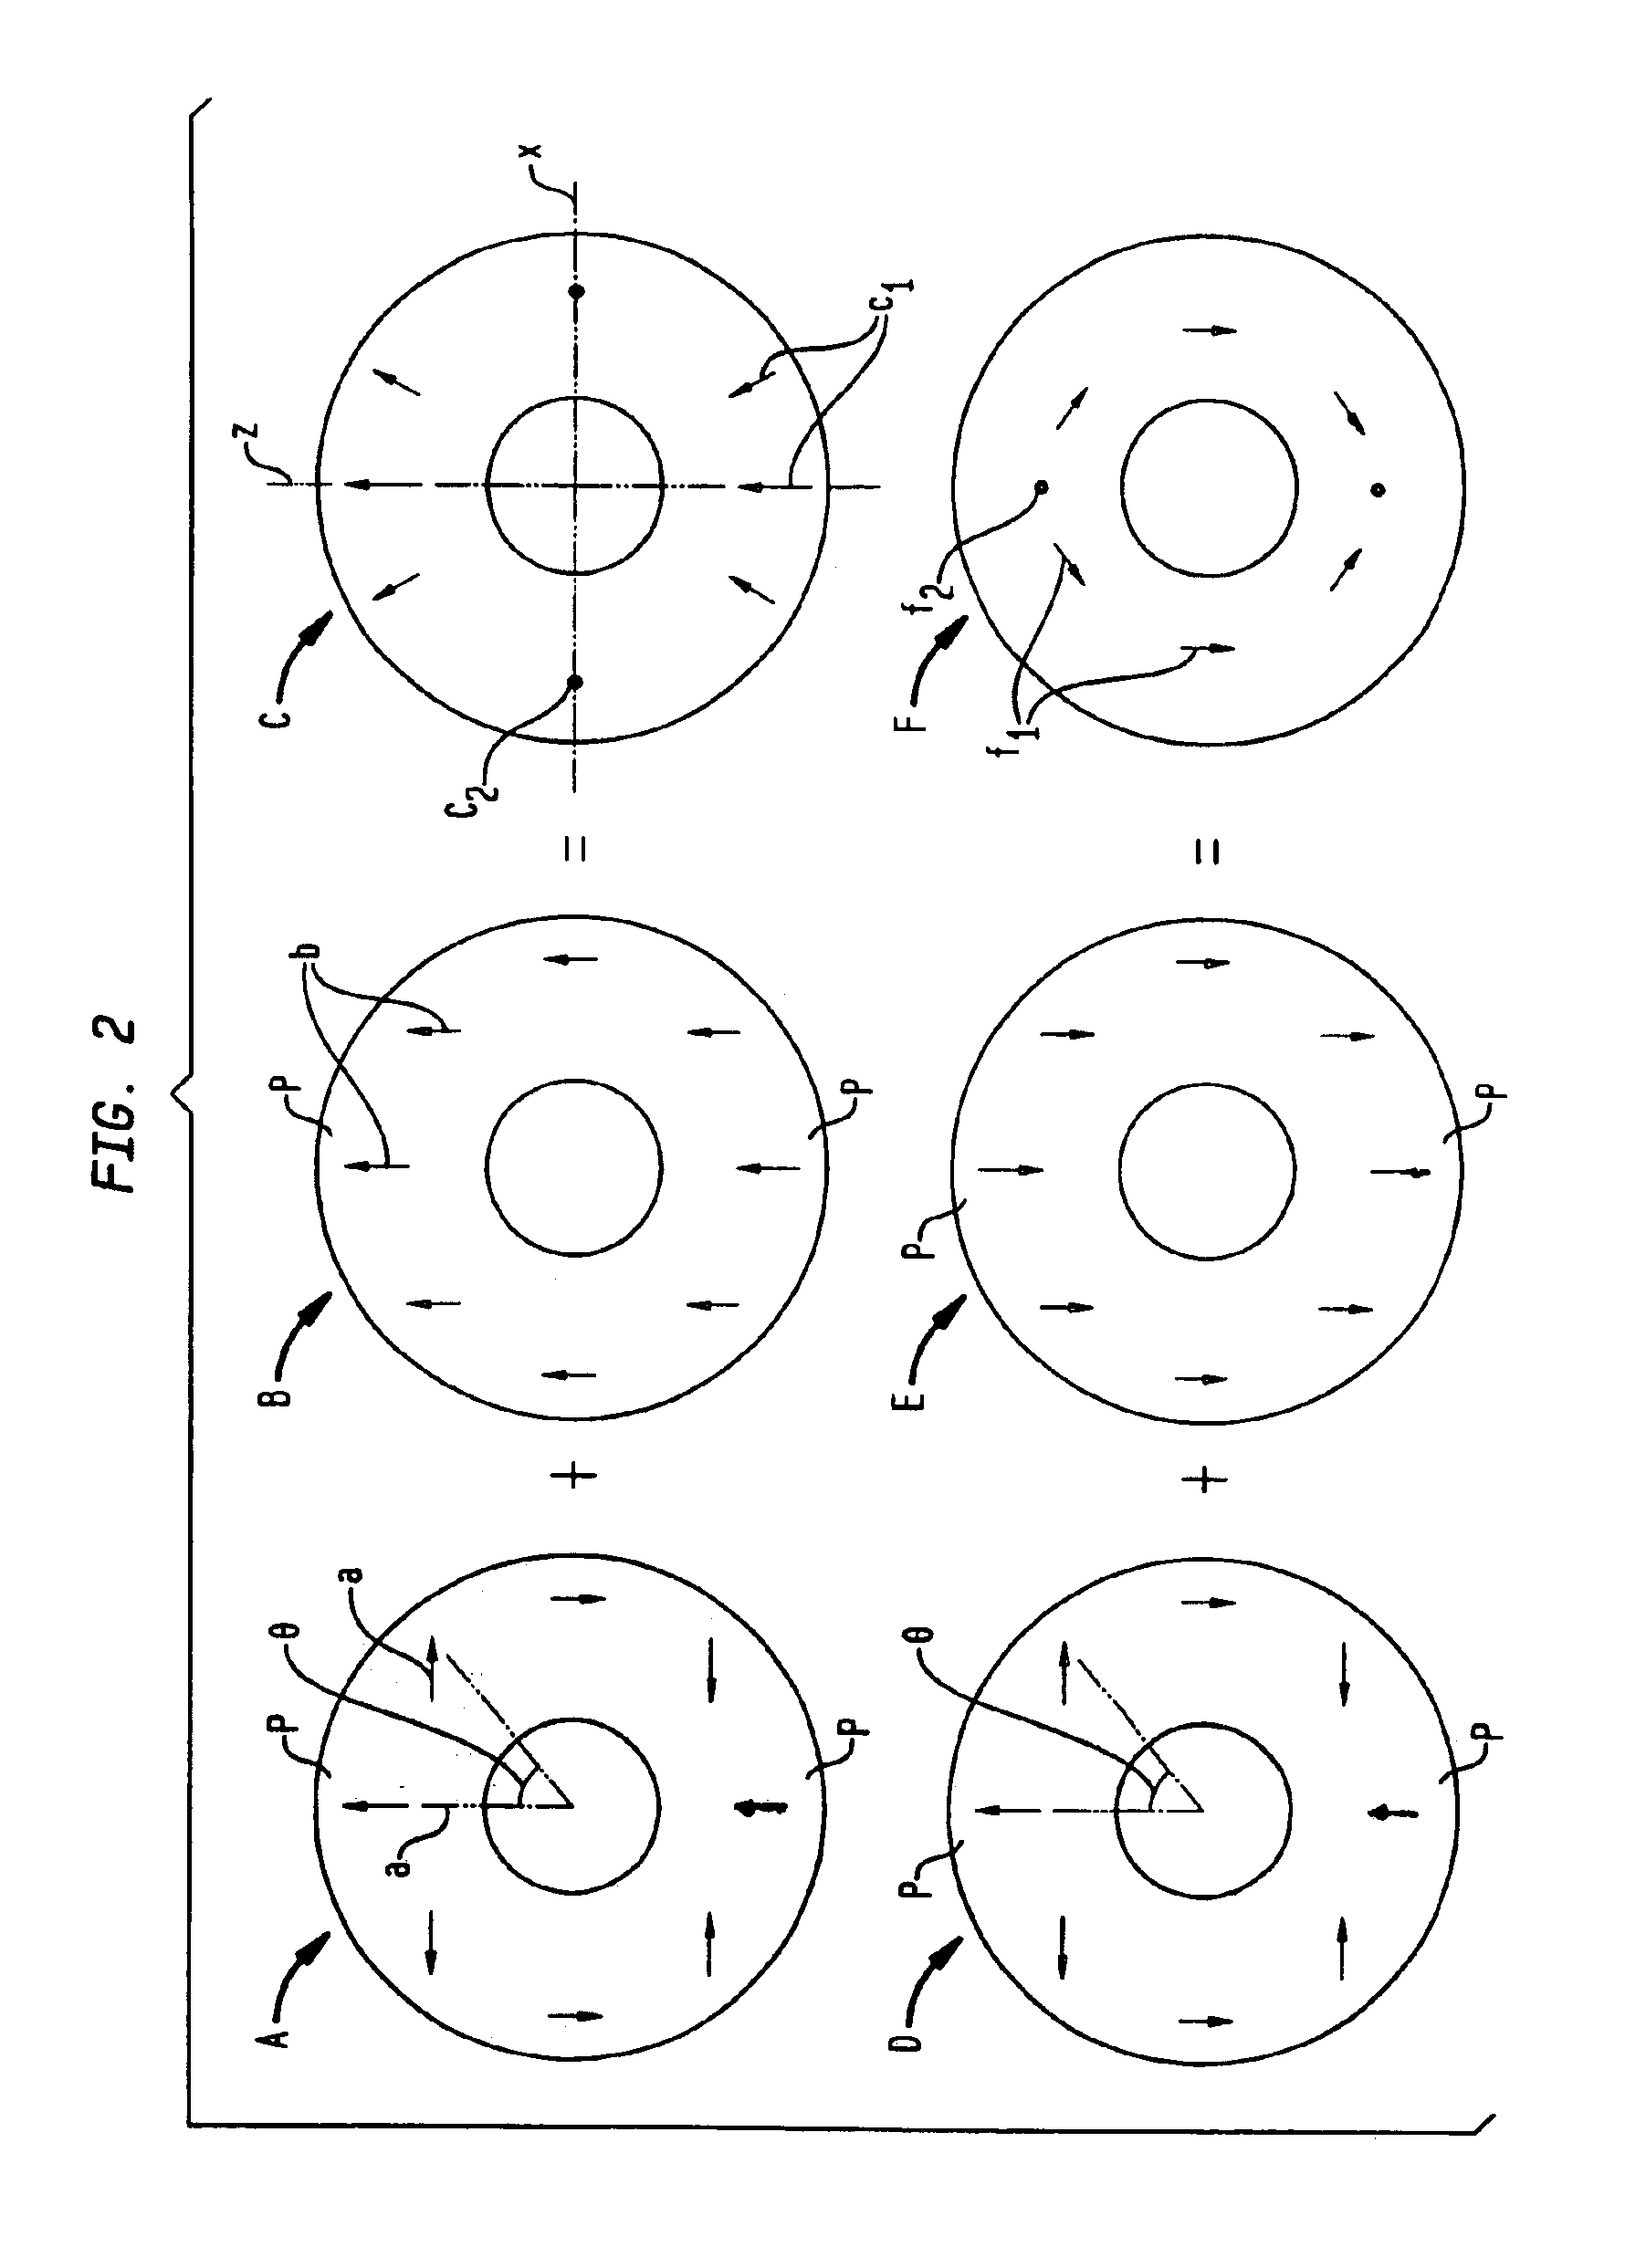 Field tapering in magnetic spheres and cylinders with distortion free access